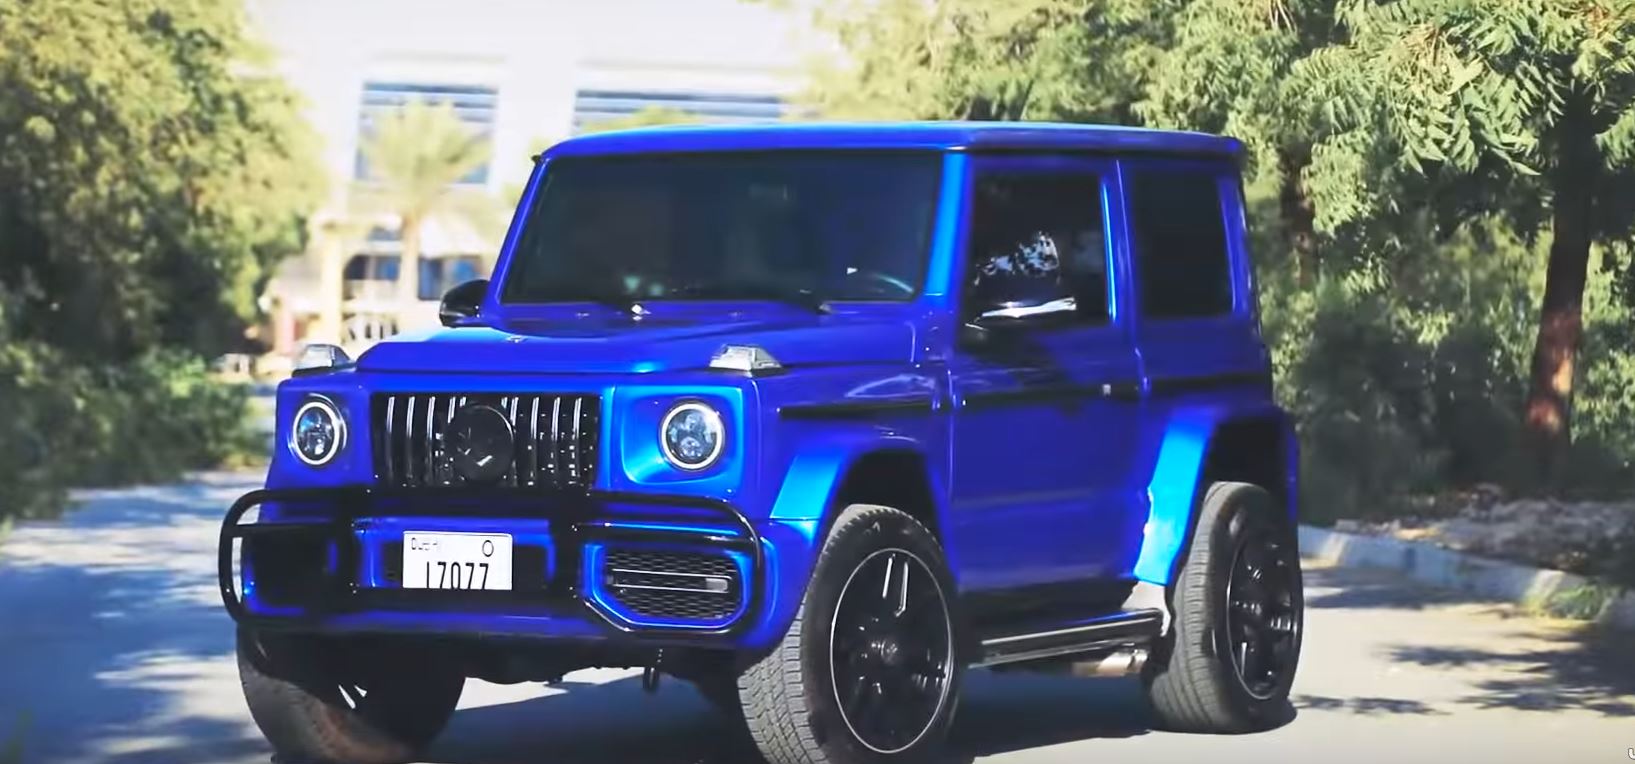 Can't afford a real G-Wagon? Convert a Suzuki Jimny to look like